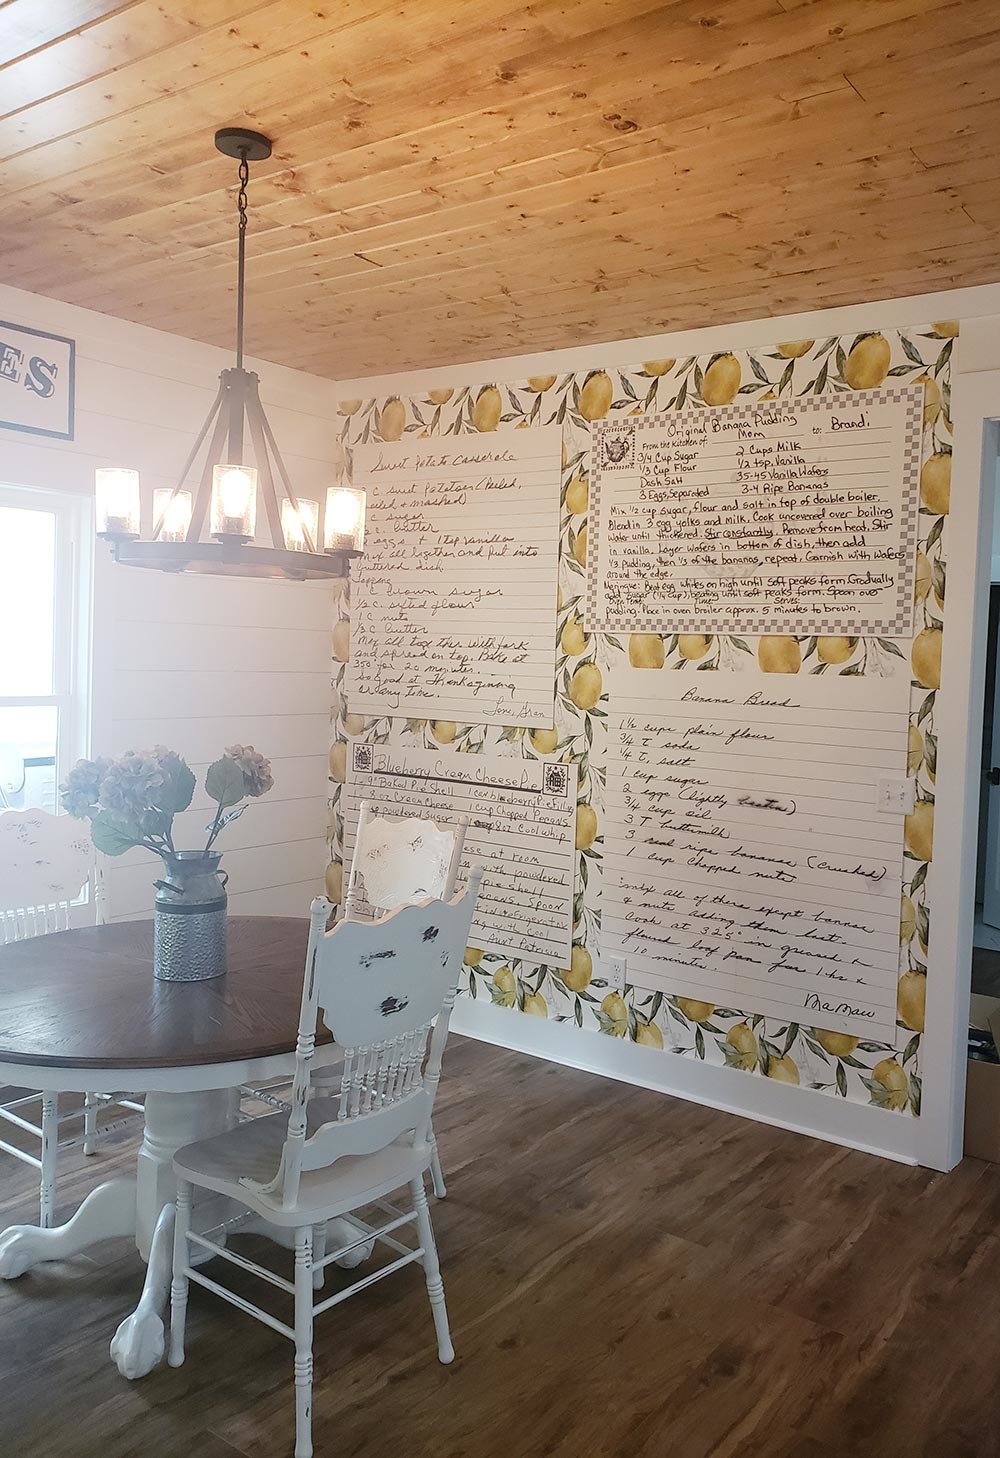 Custom Wallpaper Rolls Handwritten Recipe Backsplash Removable Rustic  Kitchen Farmhouse Decor Personalized Wall Paper Peel and Stick   httpetsyme3ct7ZAR A custom wallpaper designed with 3 to 4 or your  favorite family recipes 